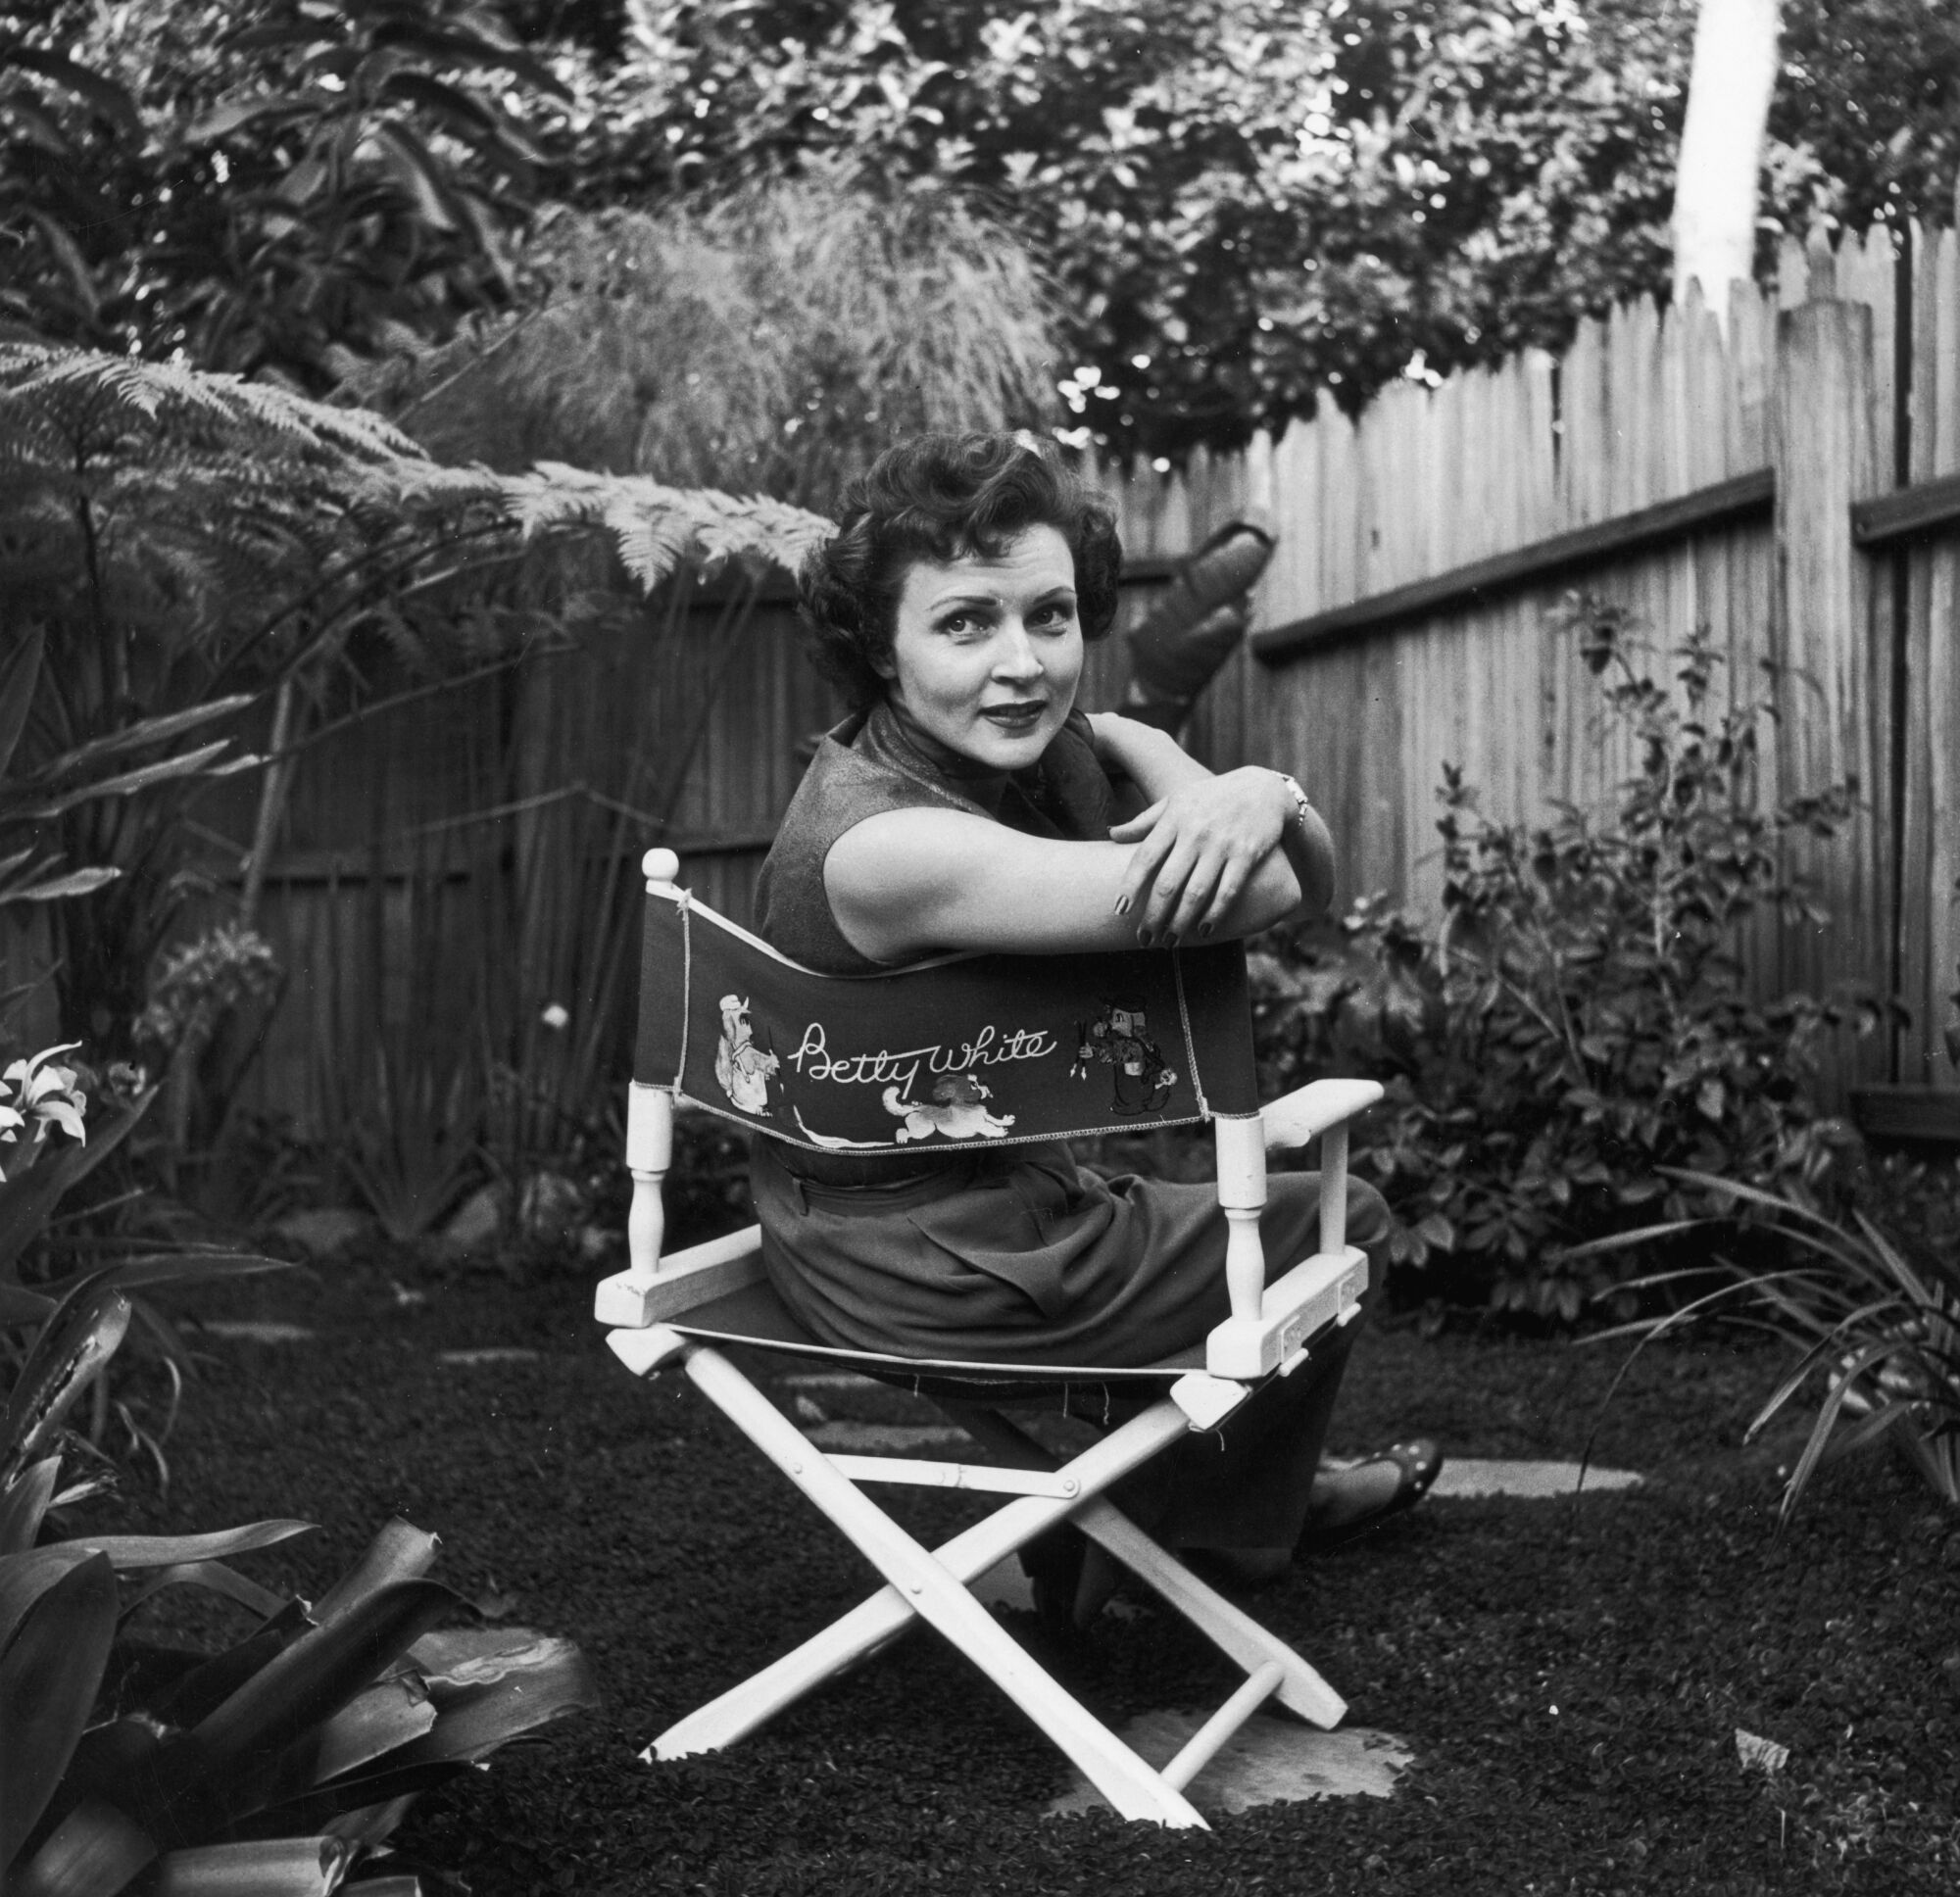 Actor Betty White sits in a canvas chair with her name on it, looking over her shoulder.